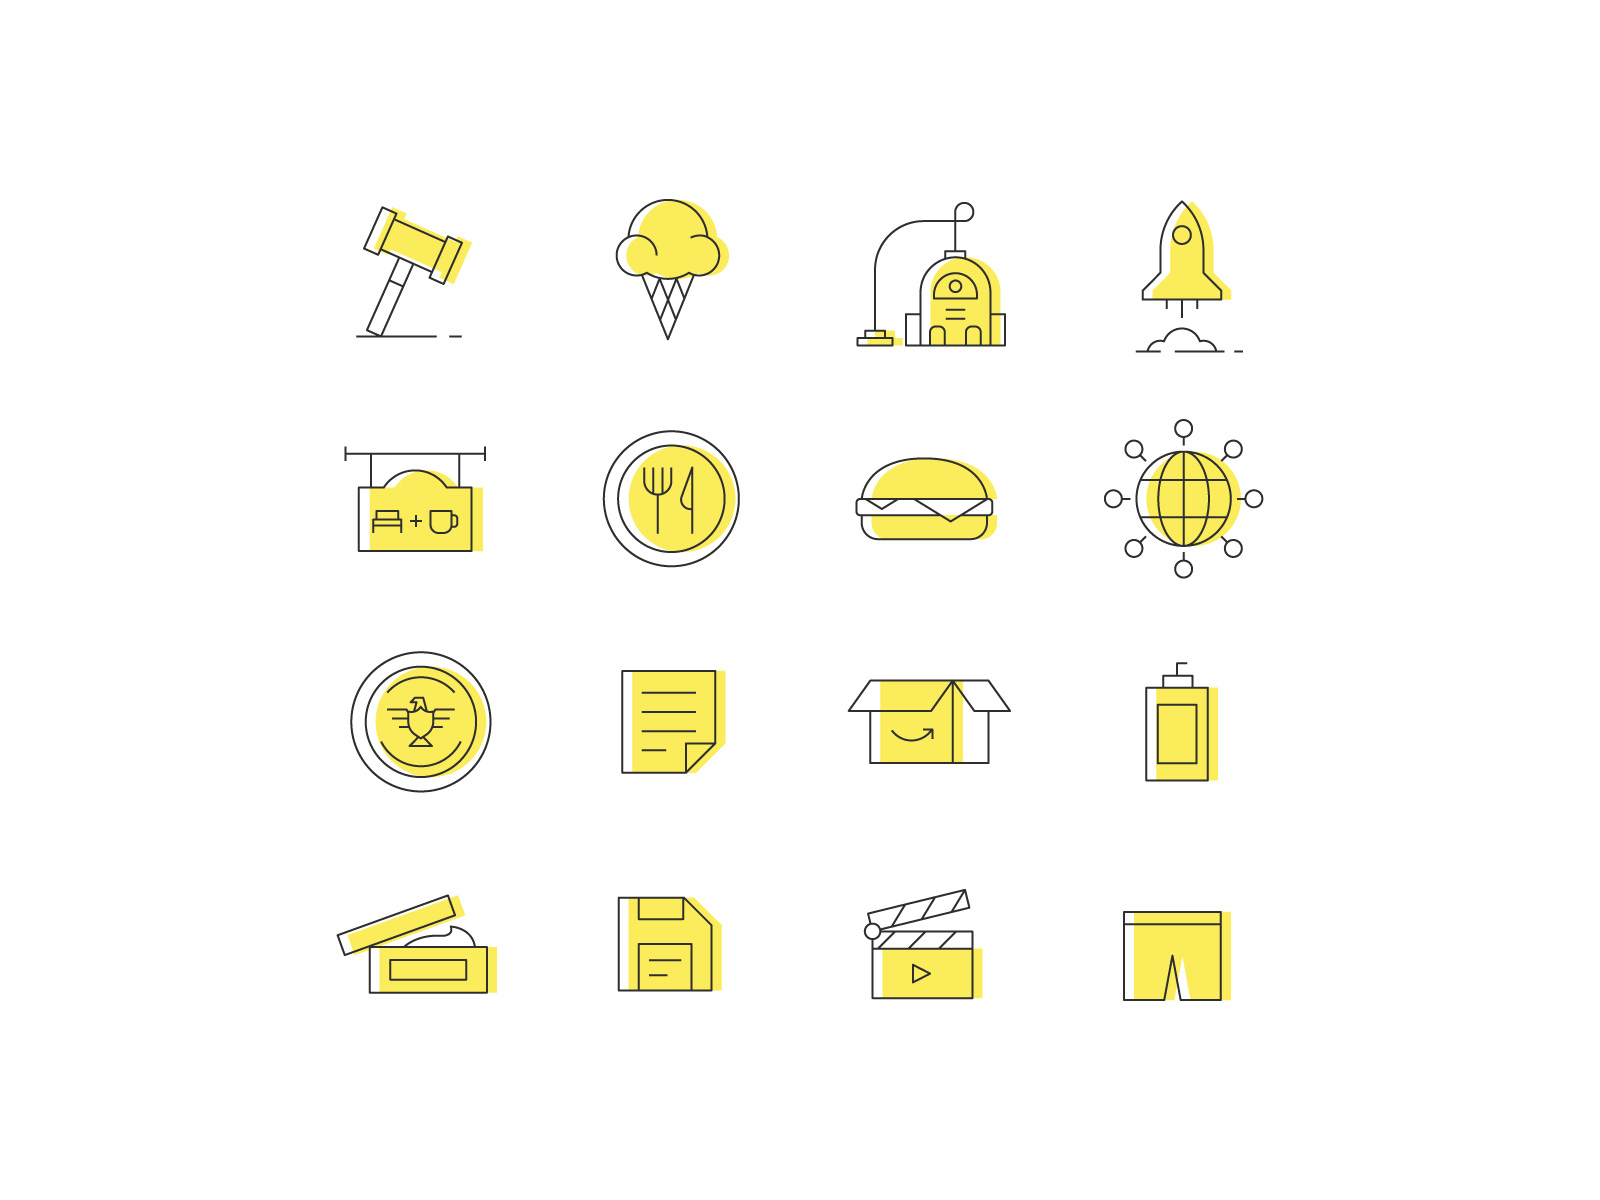 Icons paper spanx movie floppy disk cream shampoo package president business burger restaurant rocket vacuum icecream law iconography icons line stylized